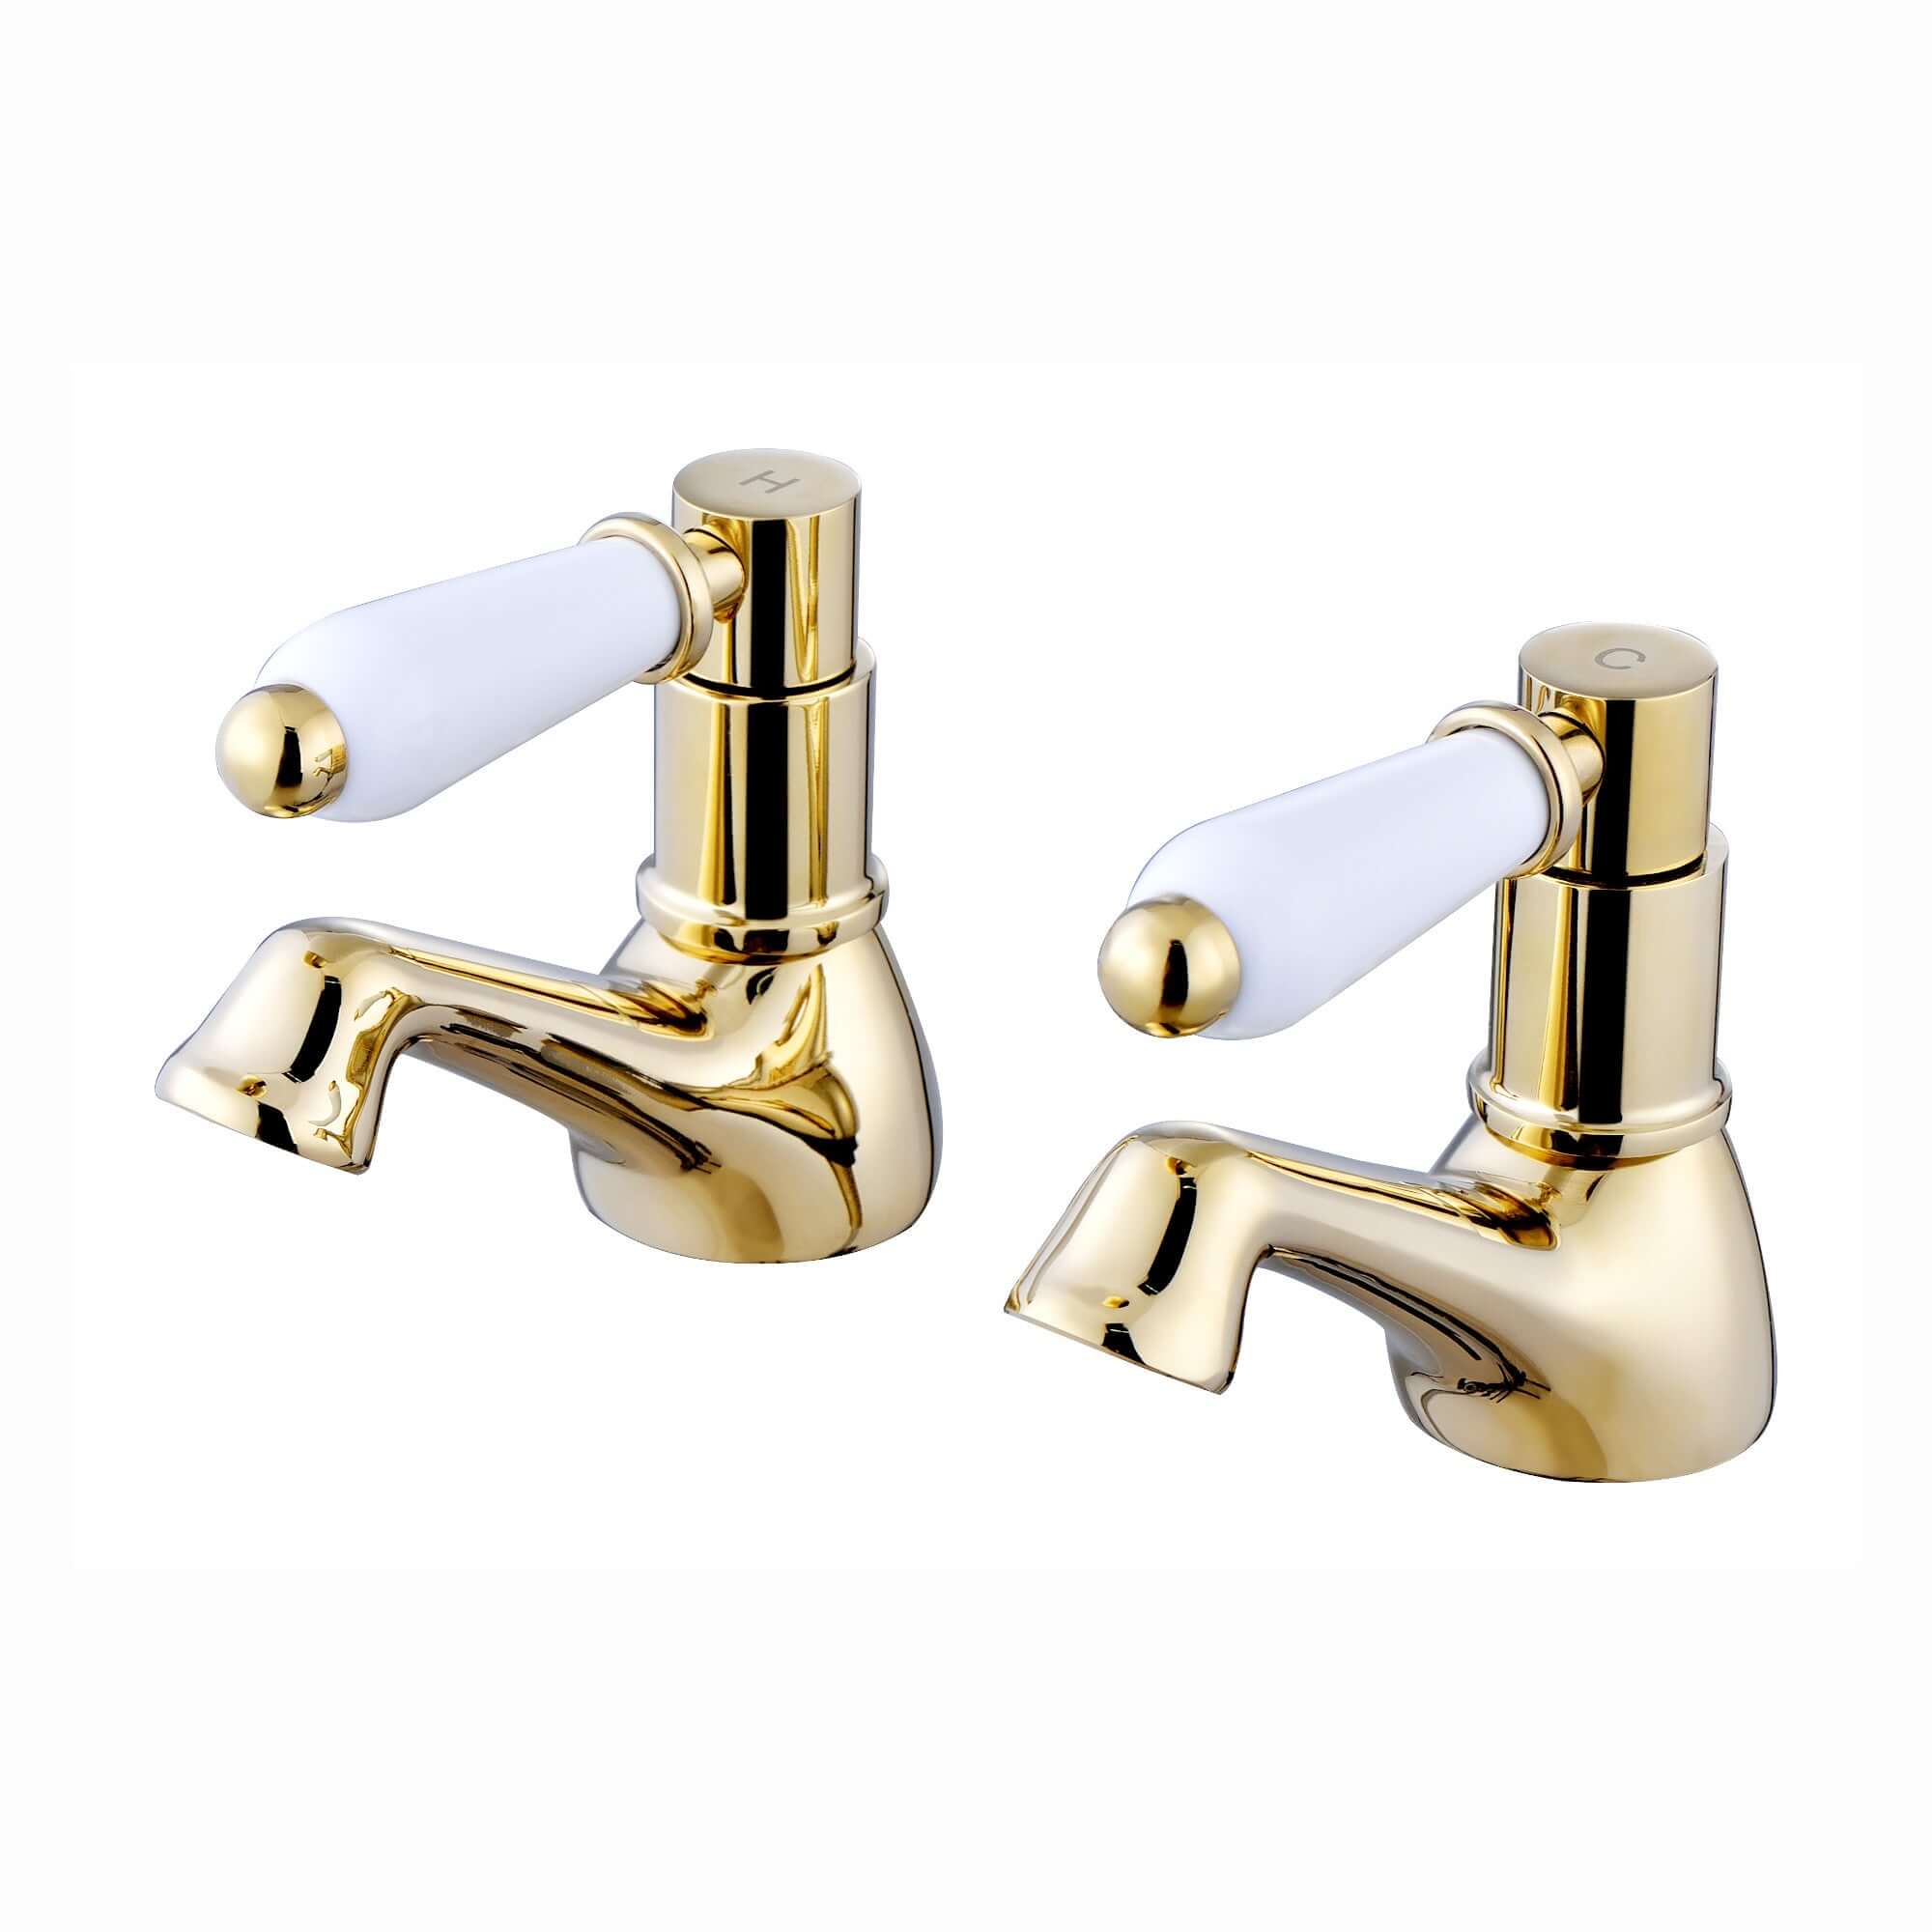 Downton hot and cold bath taps with white ceramic levers - English gold - Taps